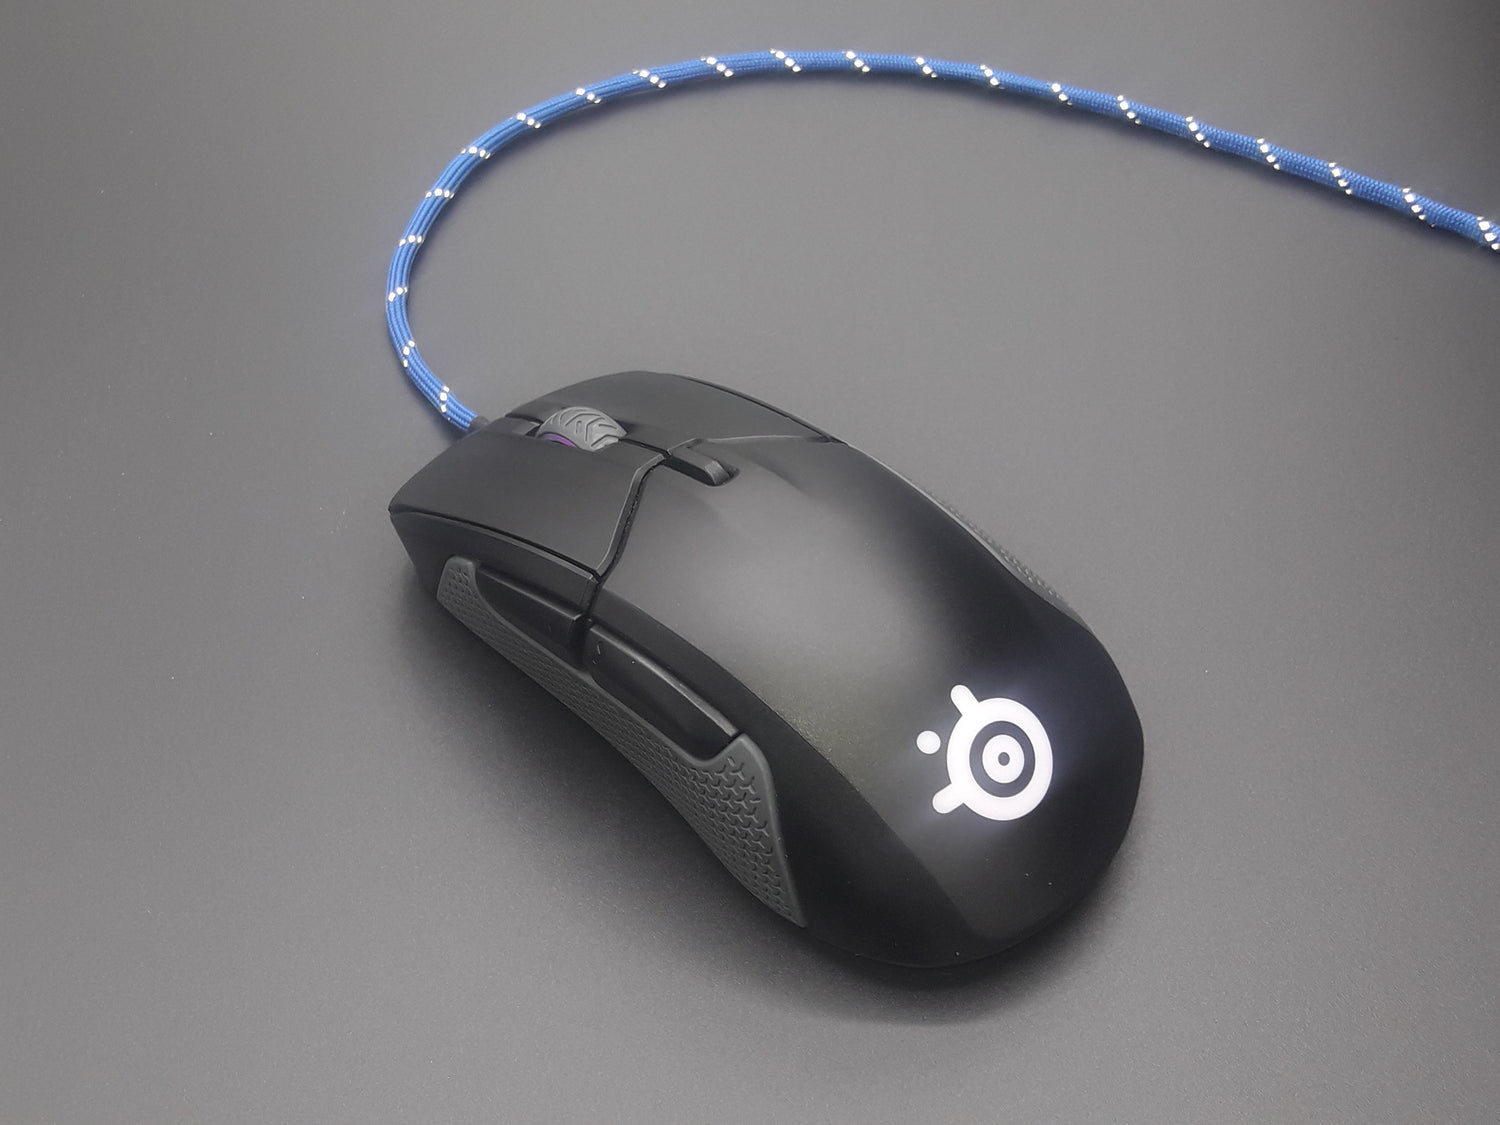 Modded Steel Series Mouse